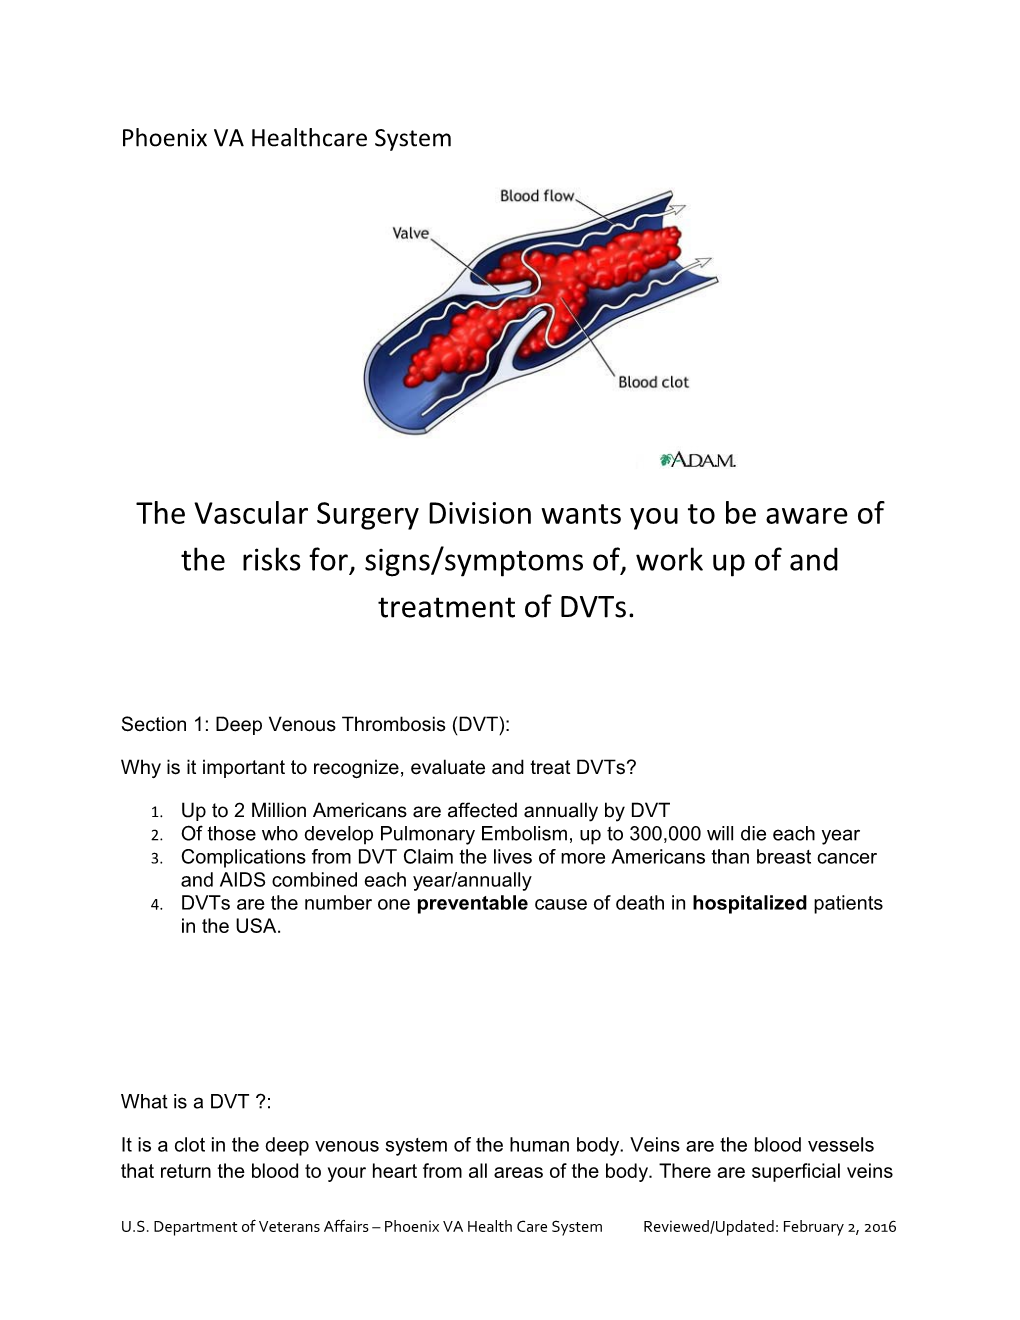 Why Is It Important to Recognize, Evaluate and Treat Dvts?